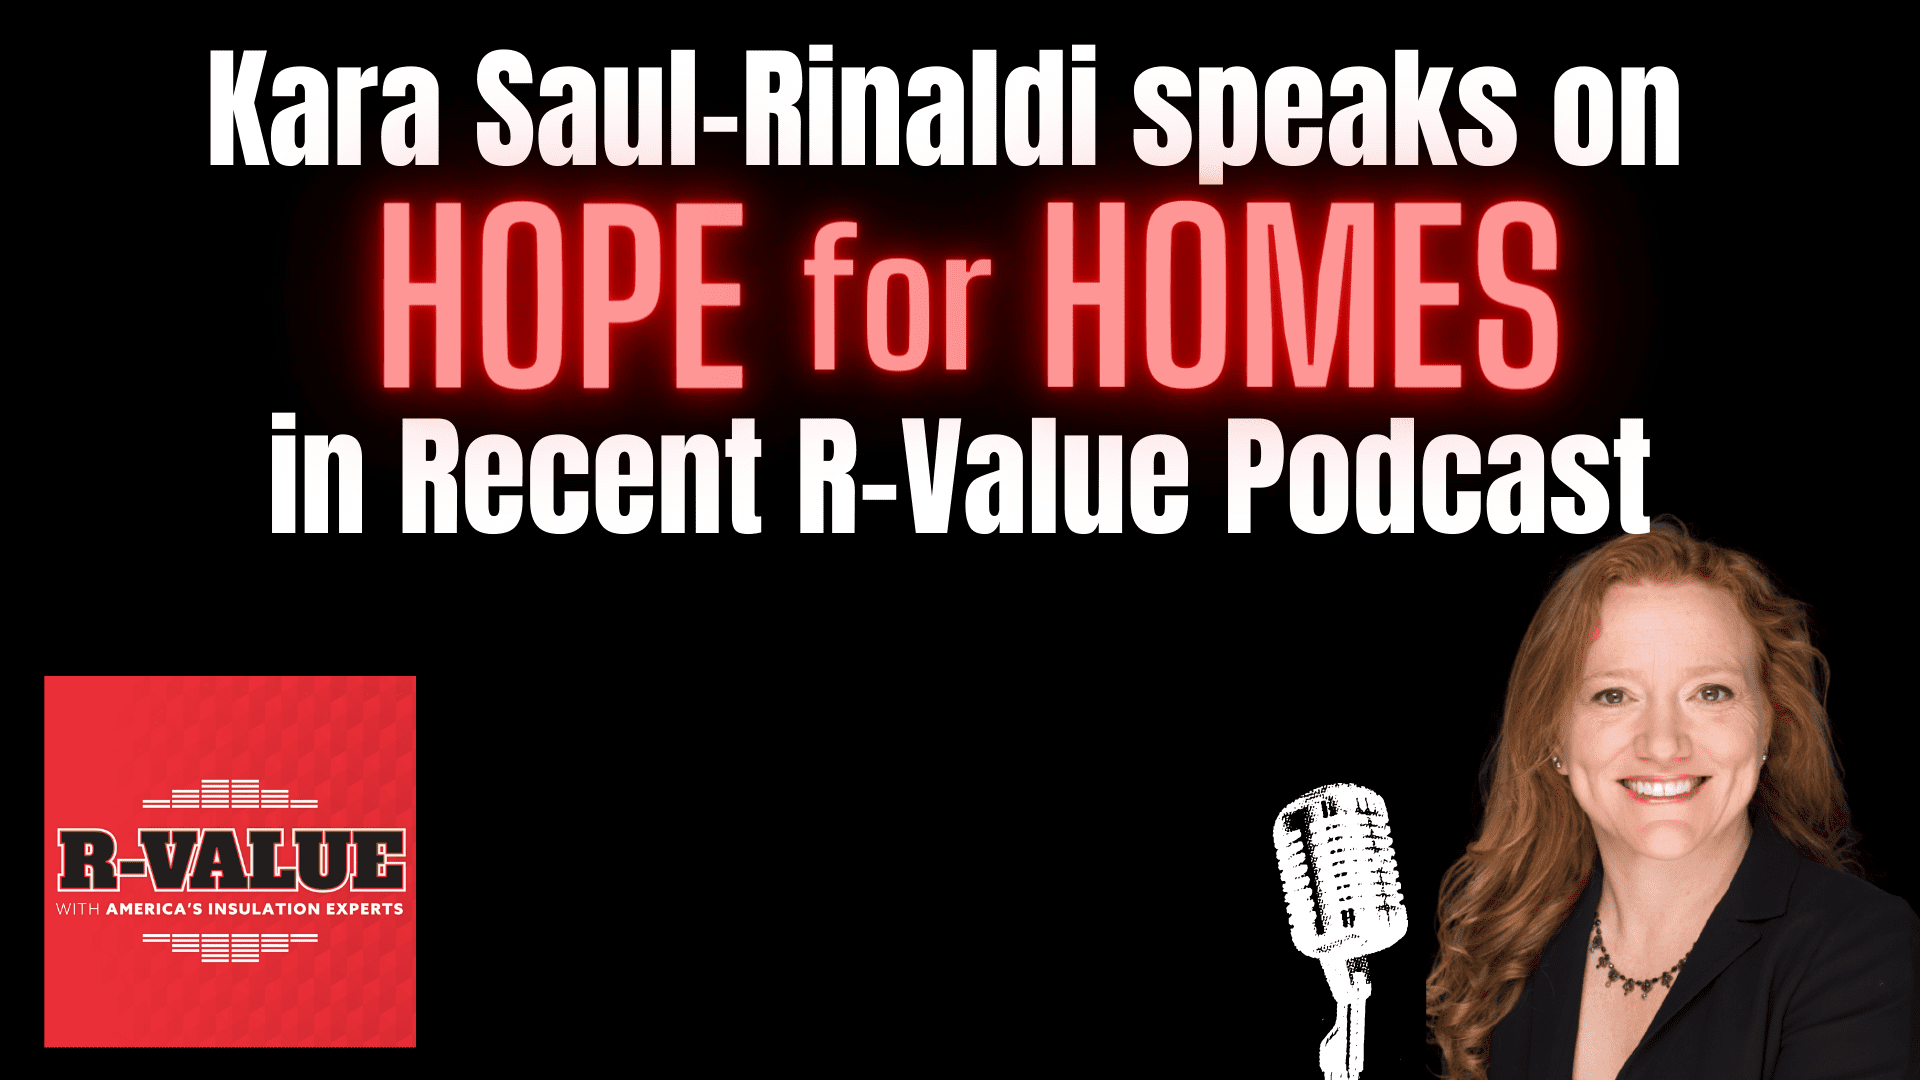 Kara Saul Rinaldi speaks on podcast about Hope for Homes